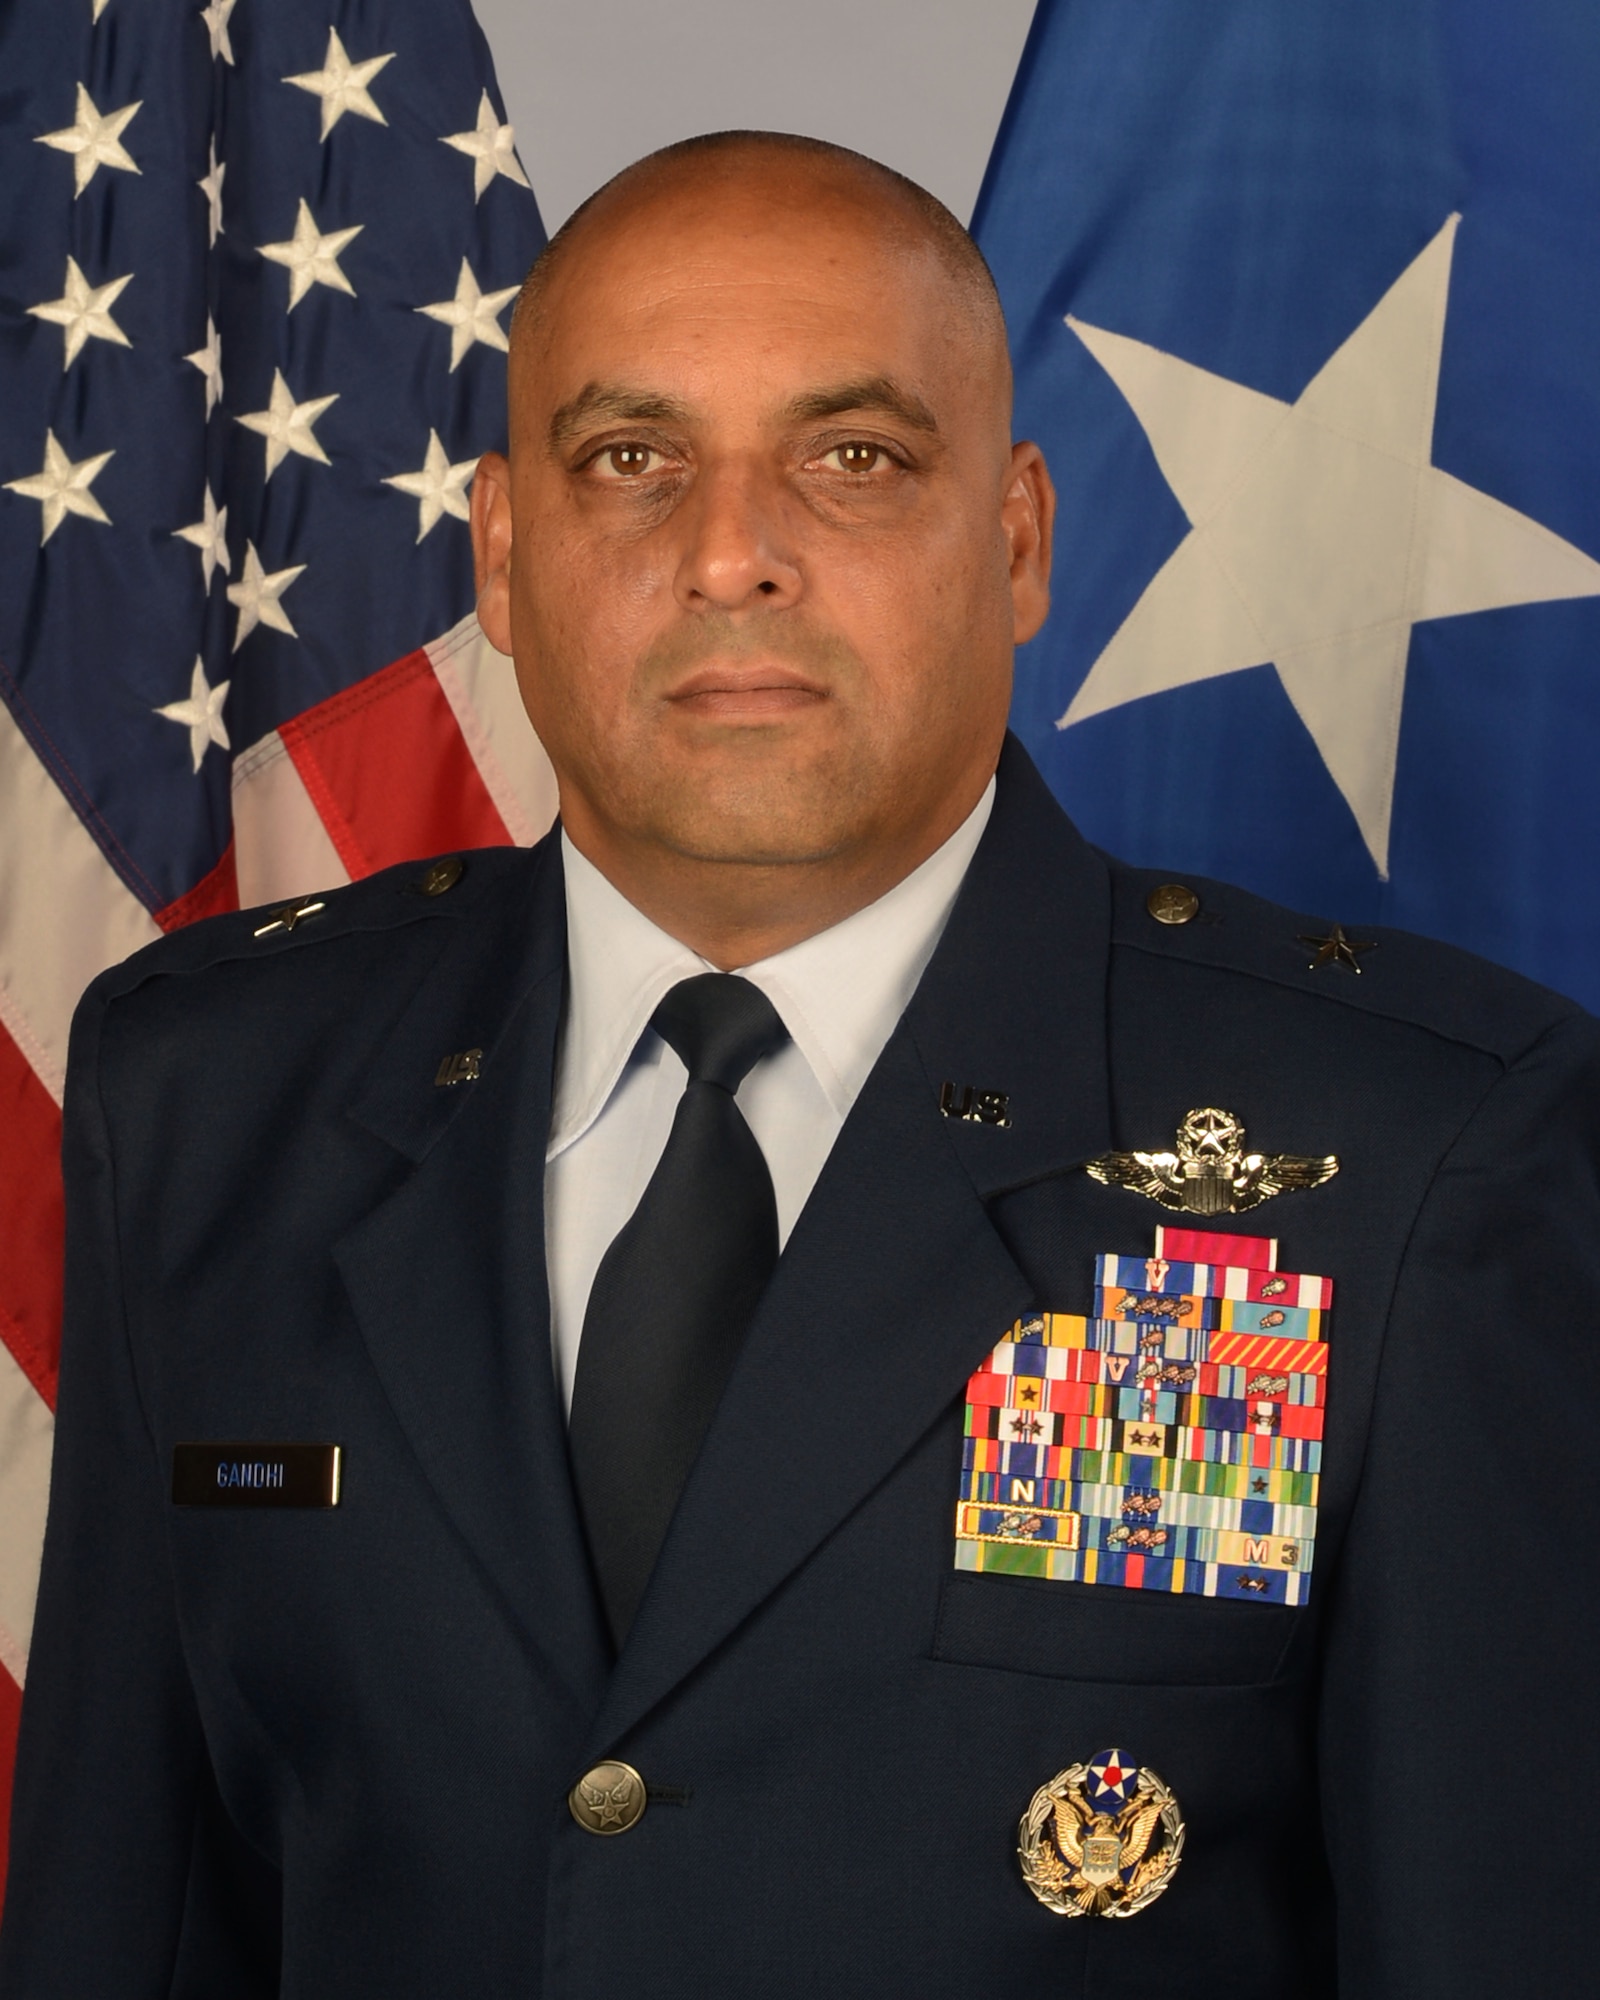 U.S. Air Force Brig. Gen. Akshai Gandhi, Assistant Adjutant General, Air for the South Carolina Air National Guard at McEntire Joint National Guard Base, South Carolina, Sept. 22, 2021. (U.S. Air National Guard photo by Senior Master Sgt. Edward Snyder, 169th Fighter Wing Public Affairs)